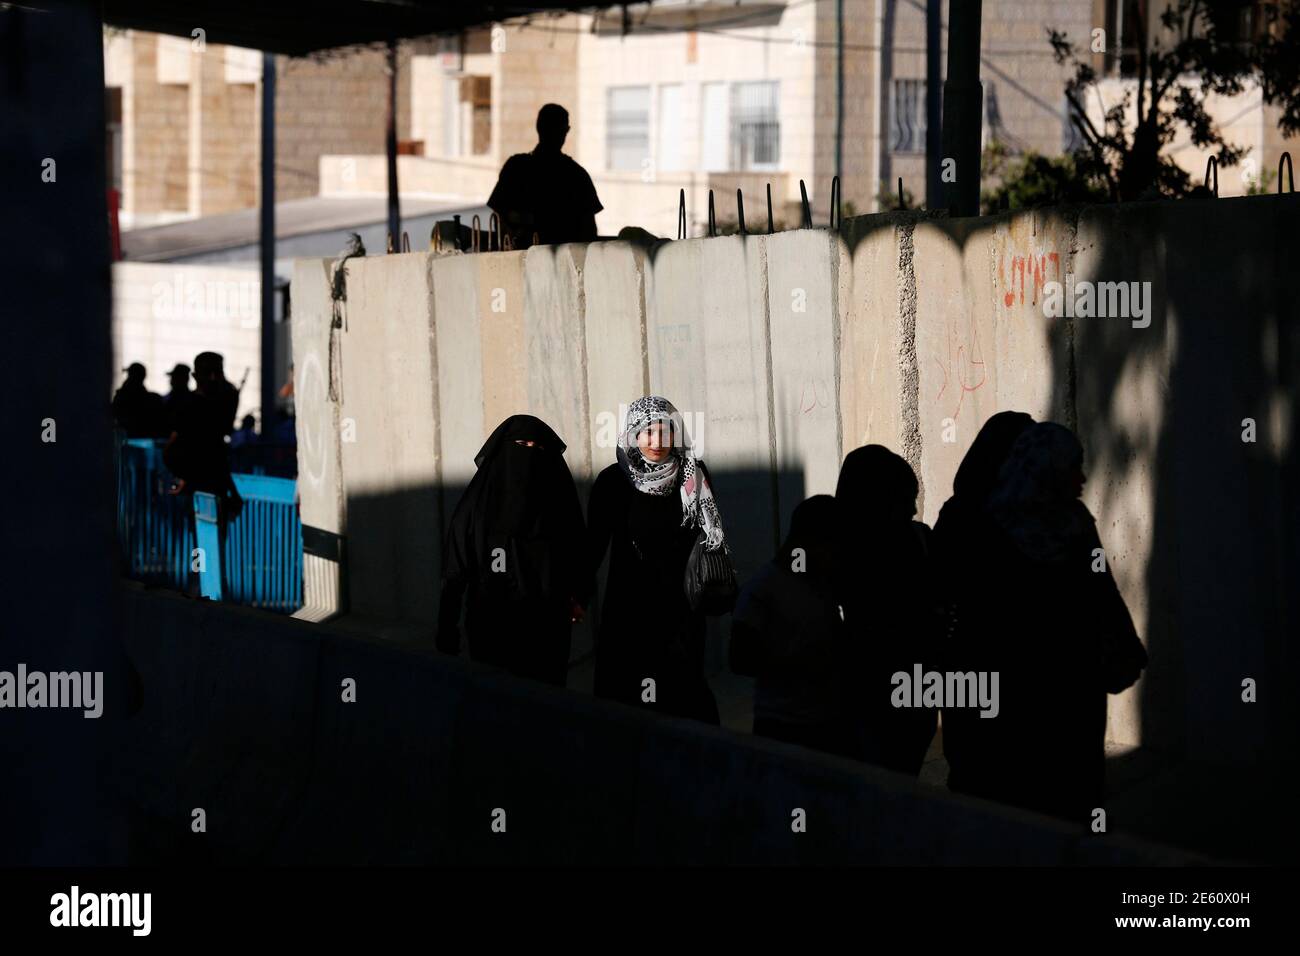 Palestinian women cross at an Israeli checkpoint in the West Bank town of Bethlehem, during the holy month of Ramadan July 26, 2013. REUTERS/Baz Ratner (WEST BANK - Tags: POLITICS RELIGION SOCIETY) Stock Photo